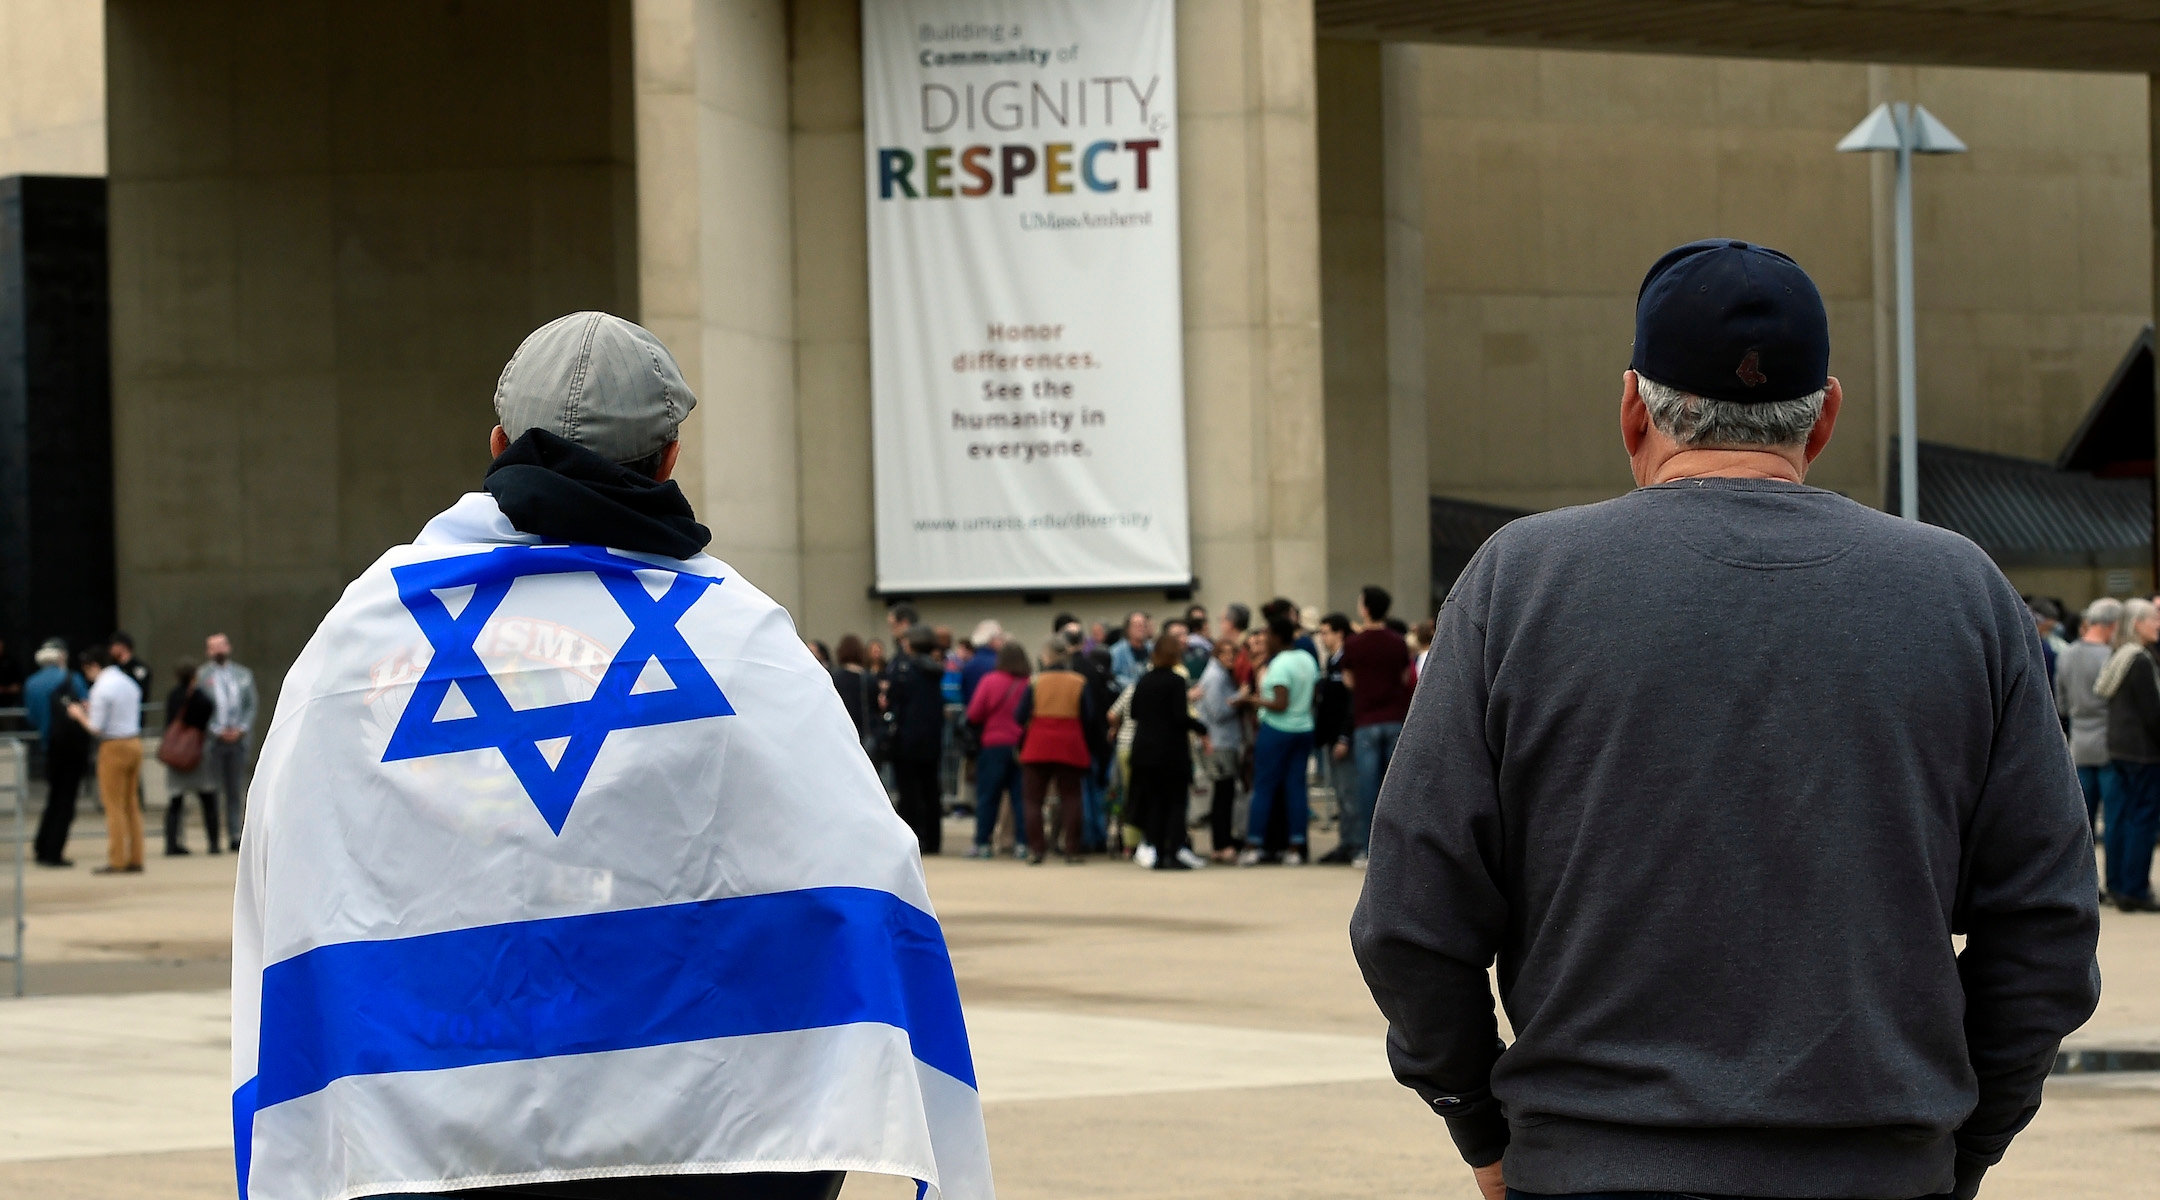 Two men, one in an Israeli flag, face a crowd